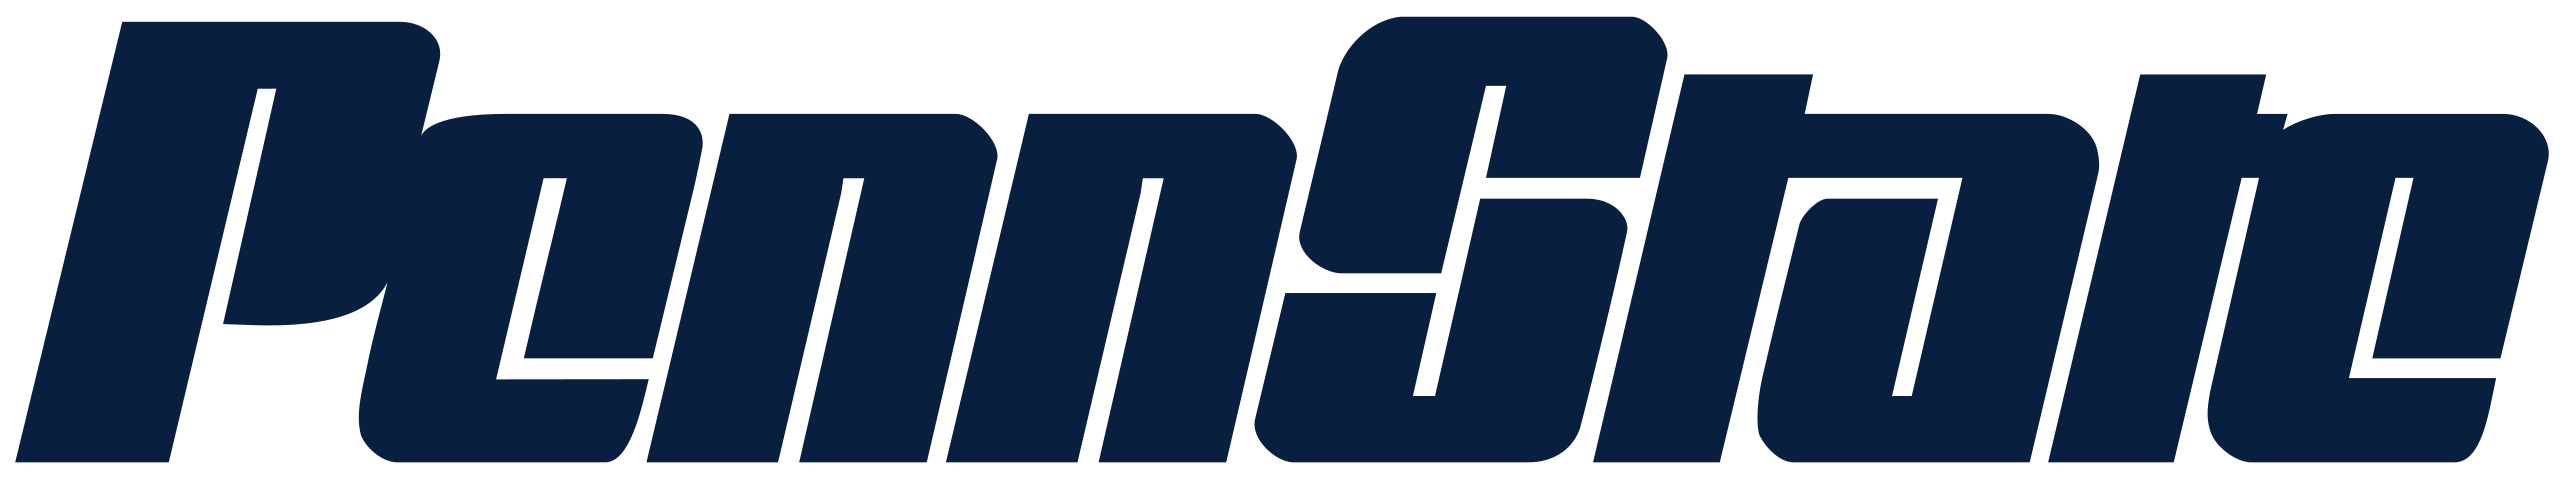 File:Penn State text logo.svg - Wikimedia Commons